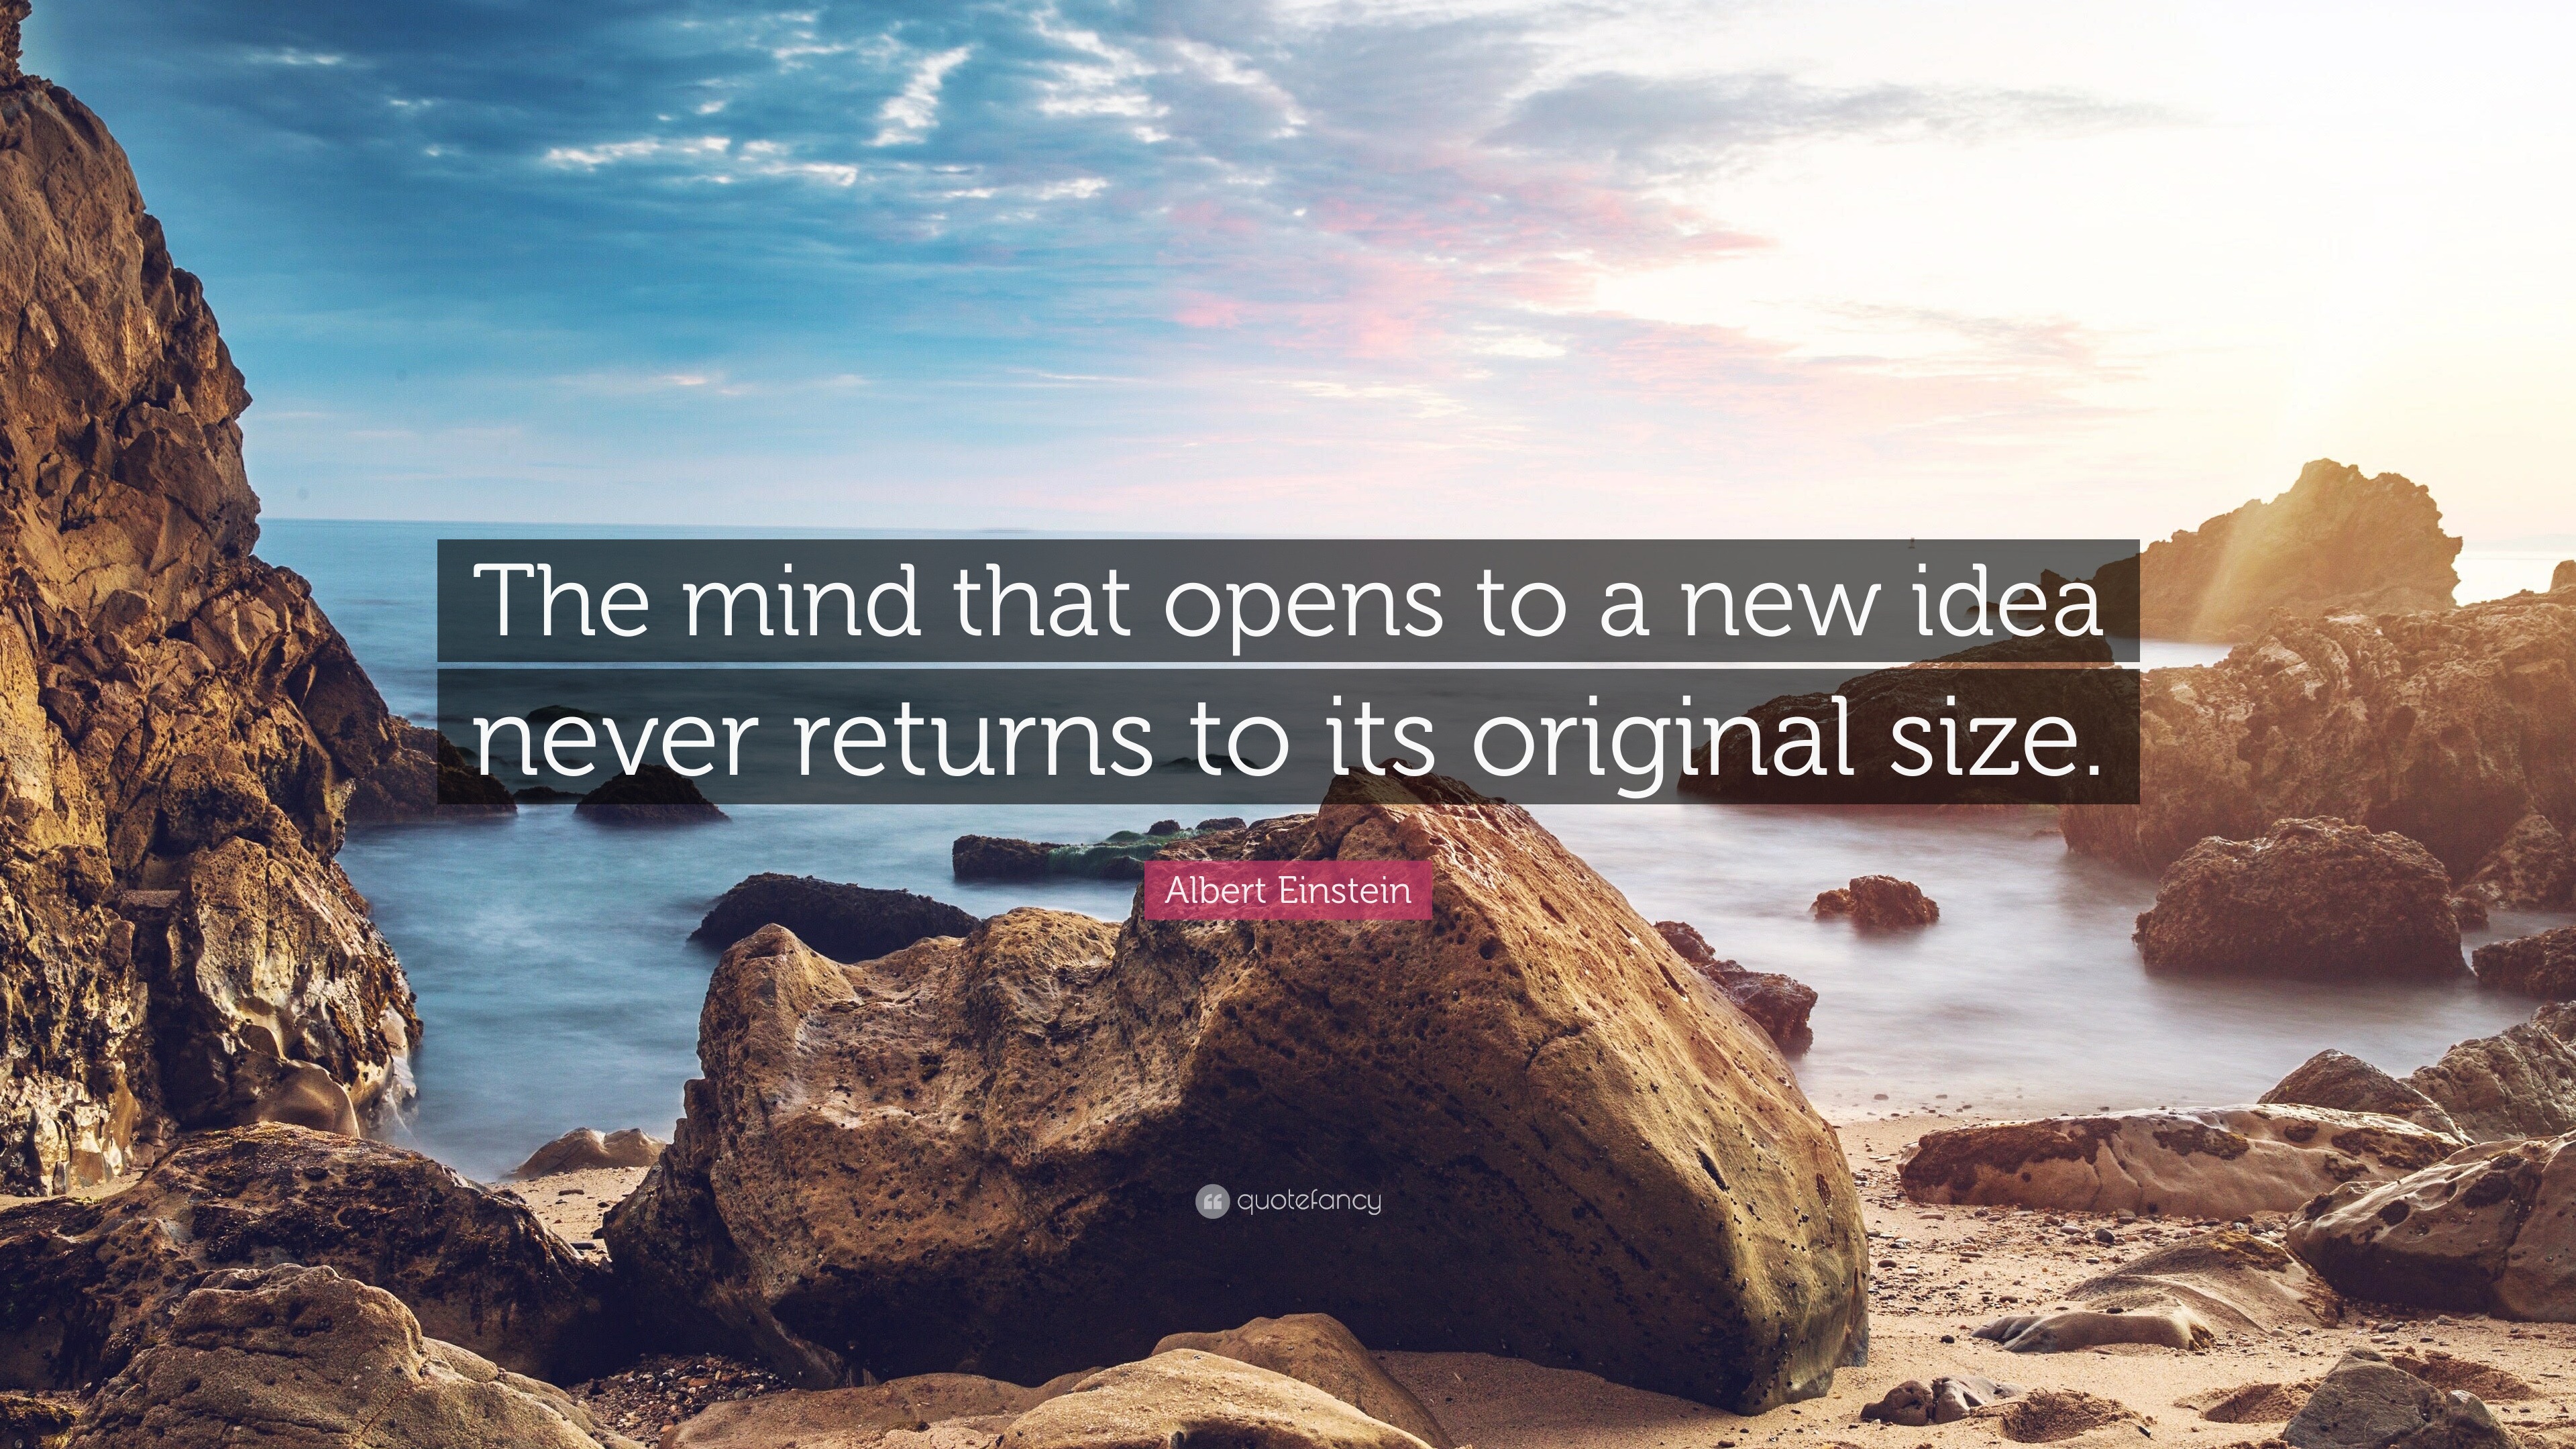 Albert Einstein Quote: “The mind that opens to a new idea never returns to  its original